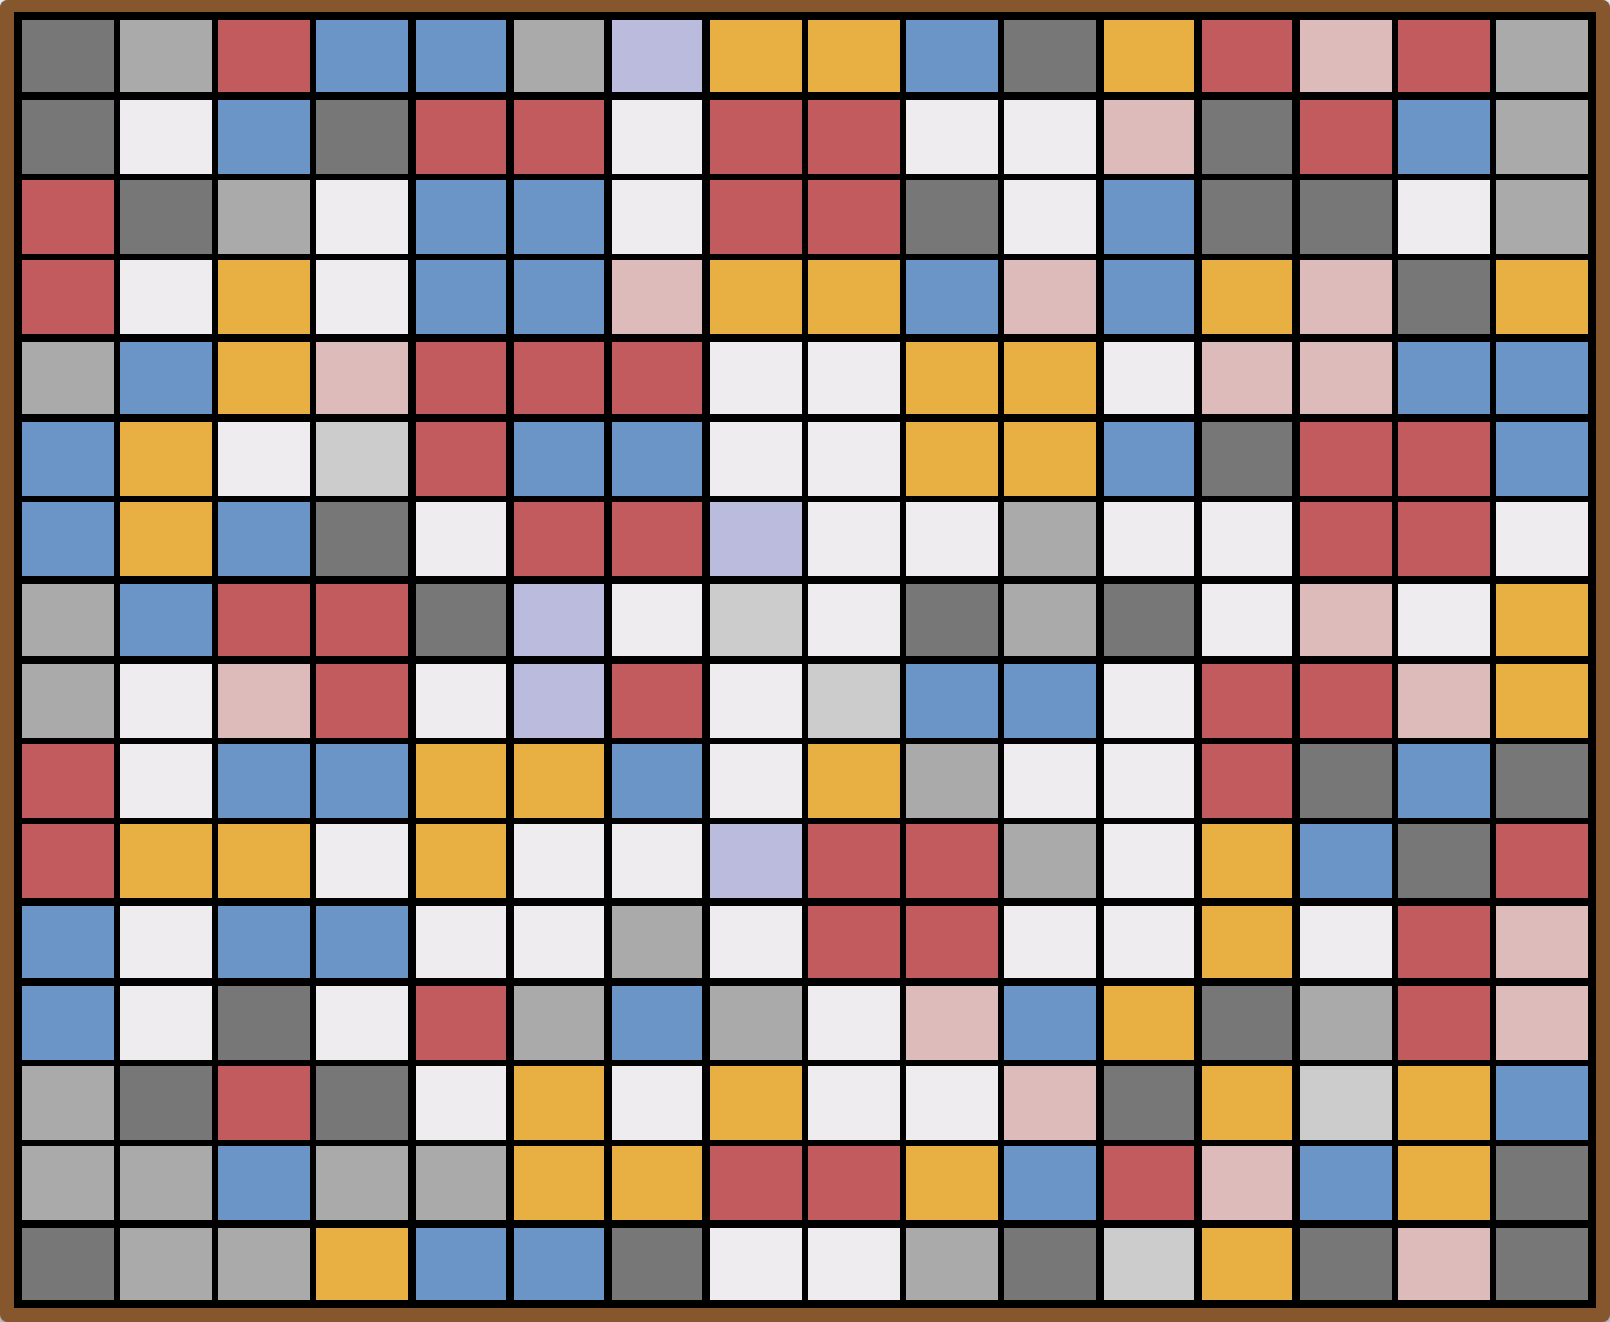 Screenshot of the Mondrian collection on CodePen